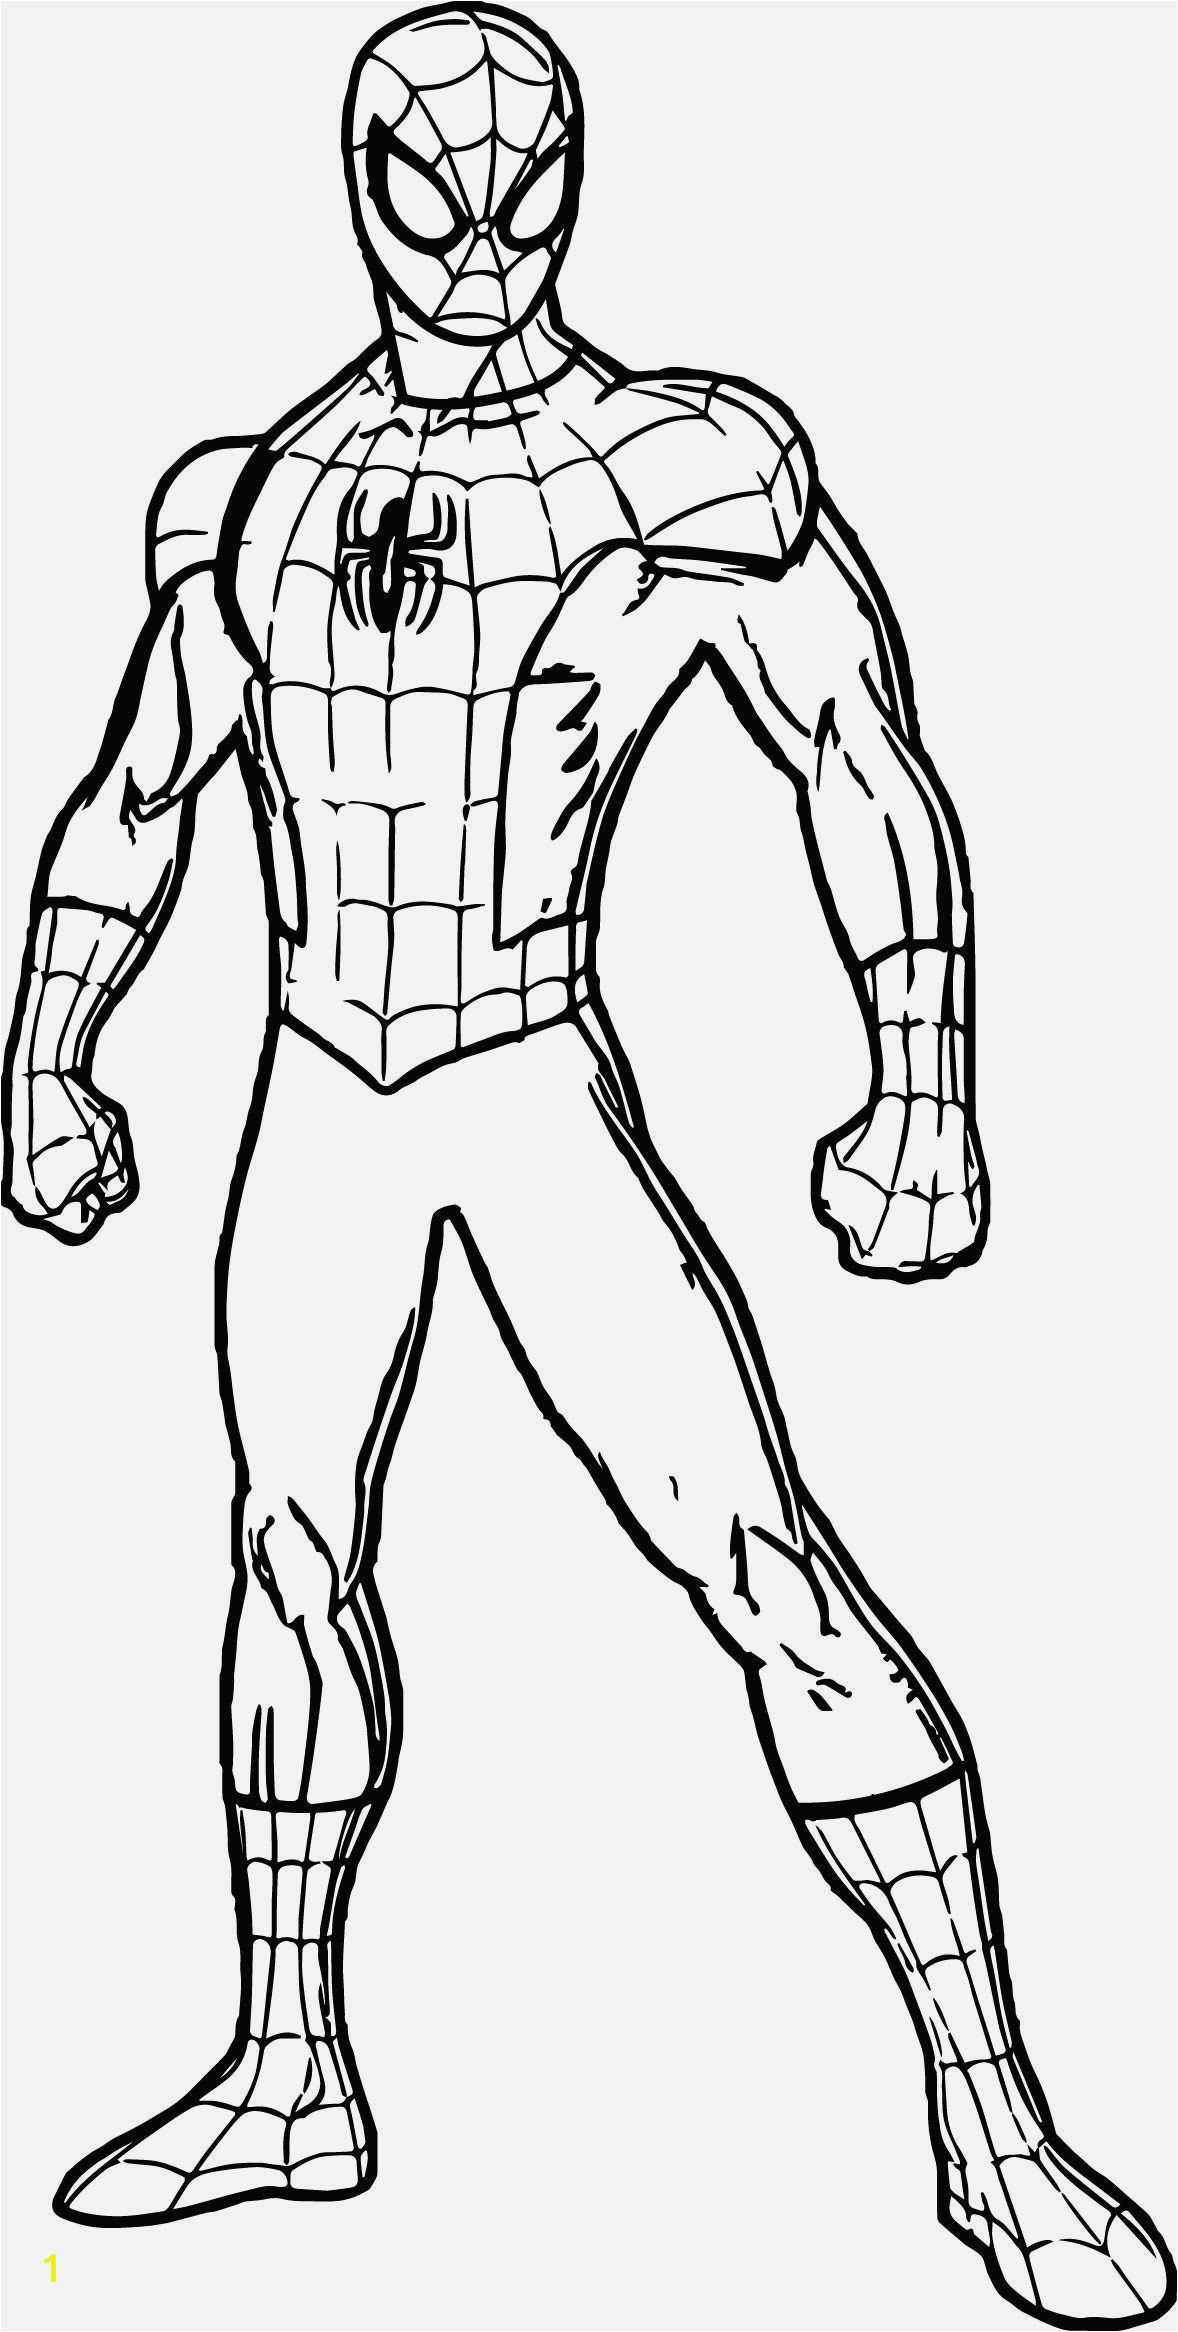 Spiderman Coloring Pages Printable Marvelous Image Of Free Spiderman Coloring Pages